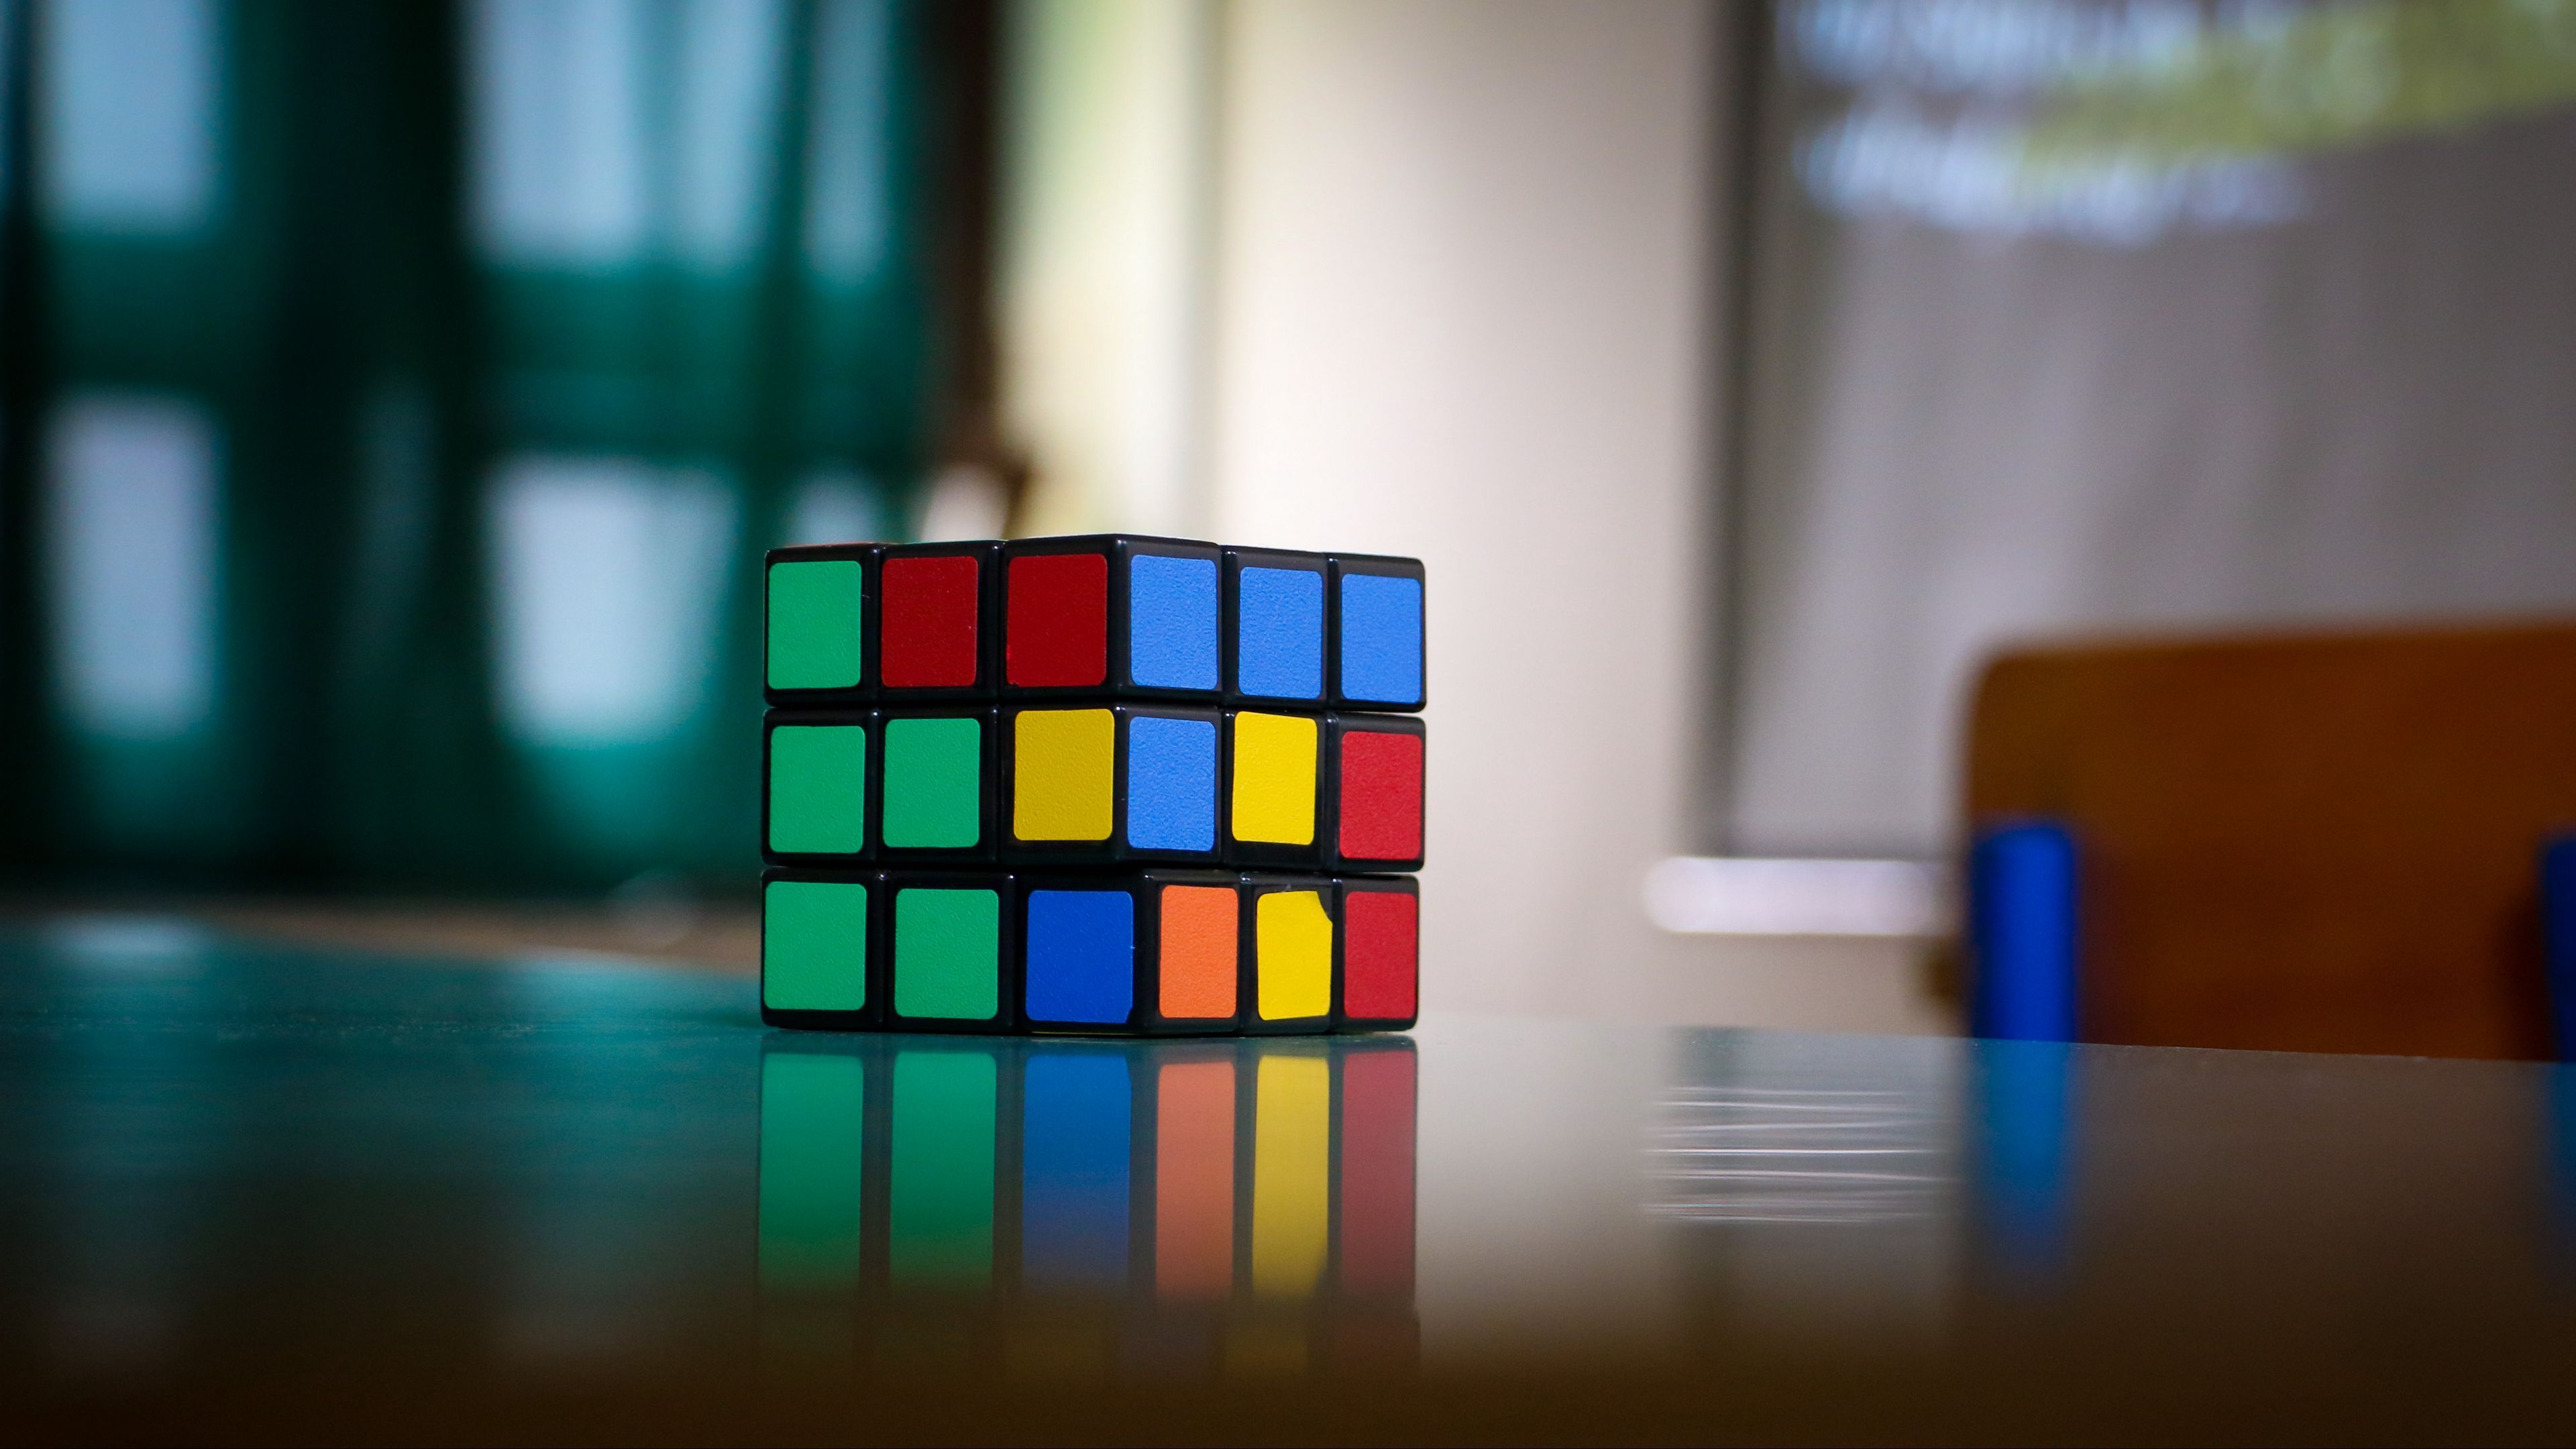 Download Wallpaper 3840x2160 Rubiks Cube, Puzzle, Multi Colored 4k Uhd 16:9 HD Background